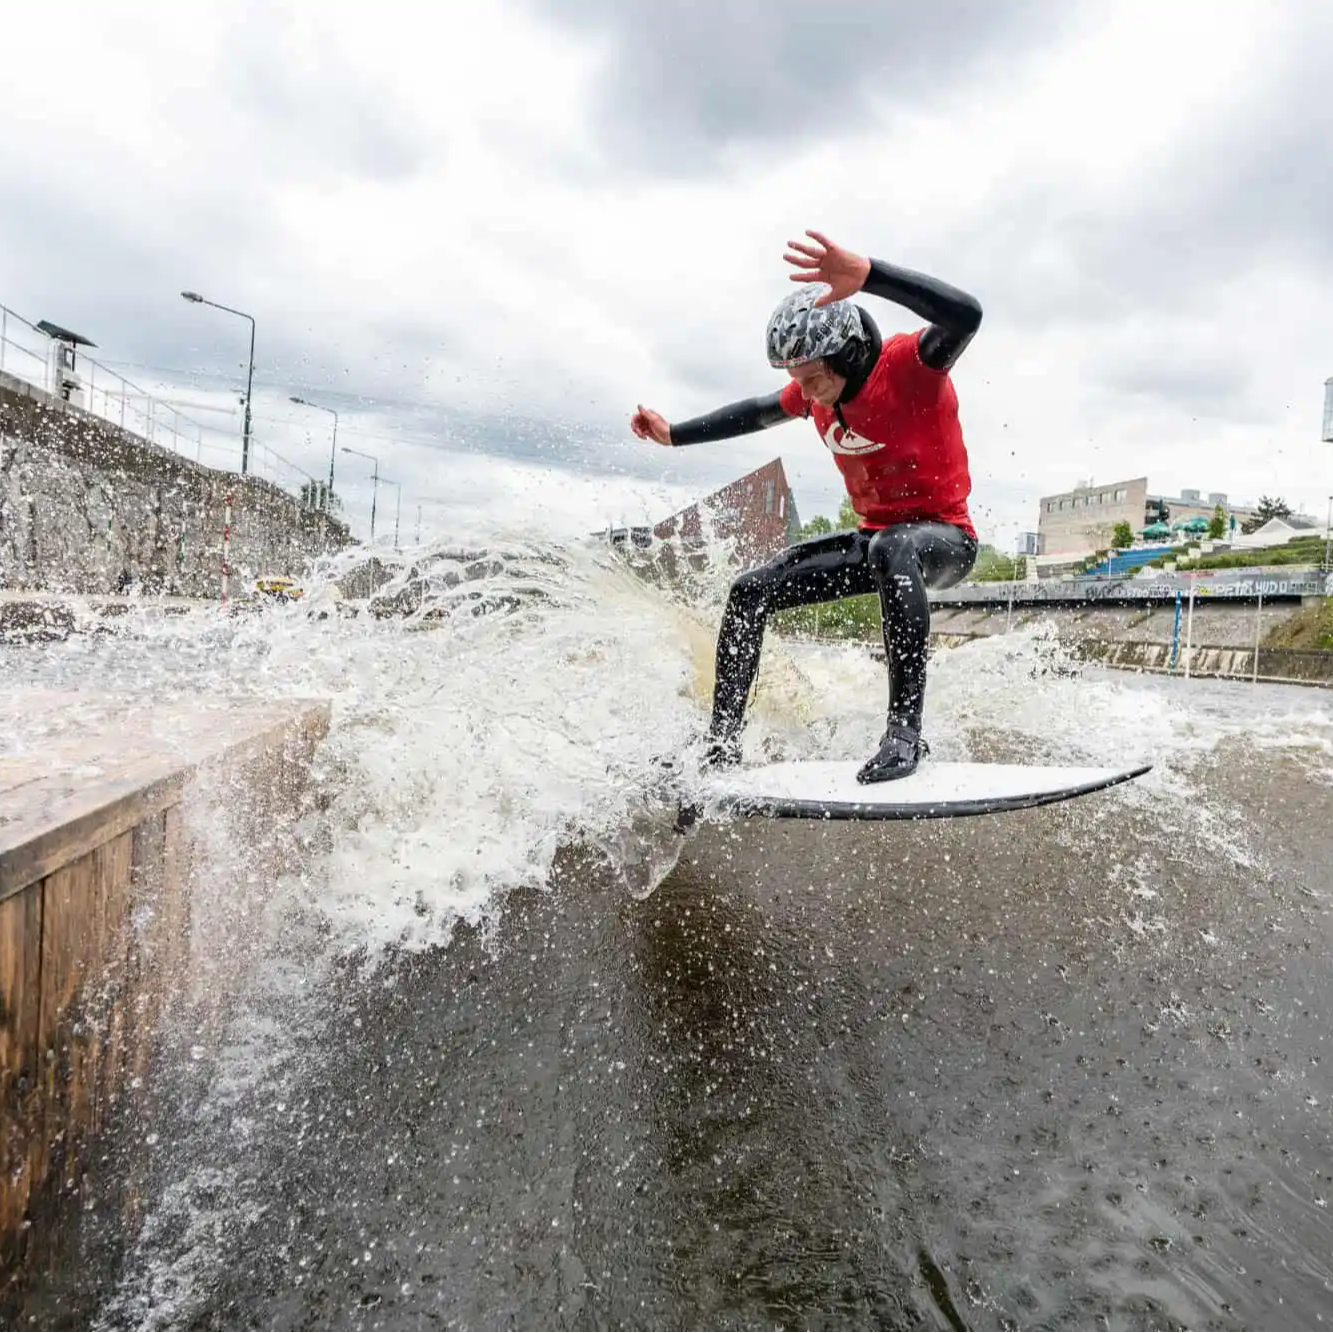 Surfing in the center of Prague - Try River Surfing with our latest EPX Hardboards and all-time favorite Foamys